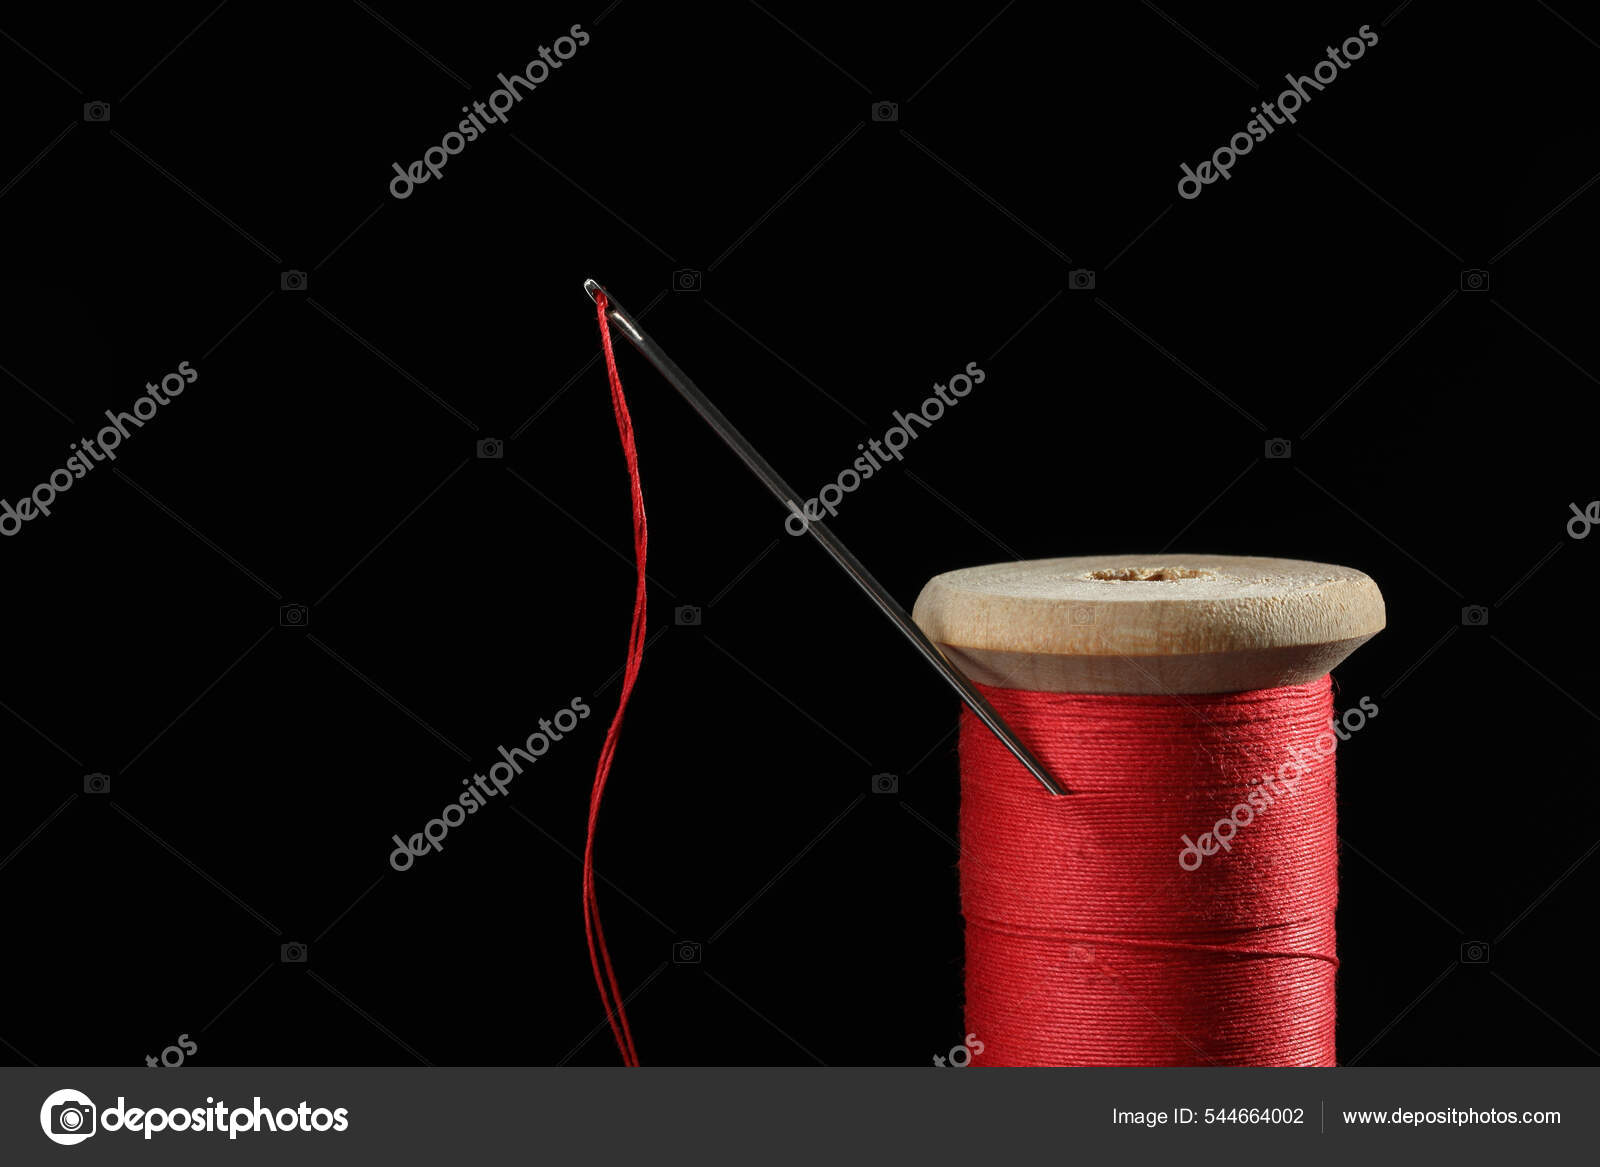 Black Thread on an Old Wooden Spool and Sewing Needle Stock